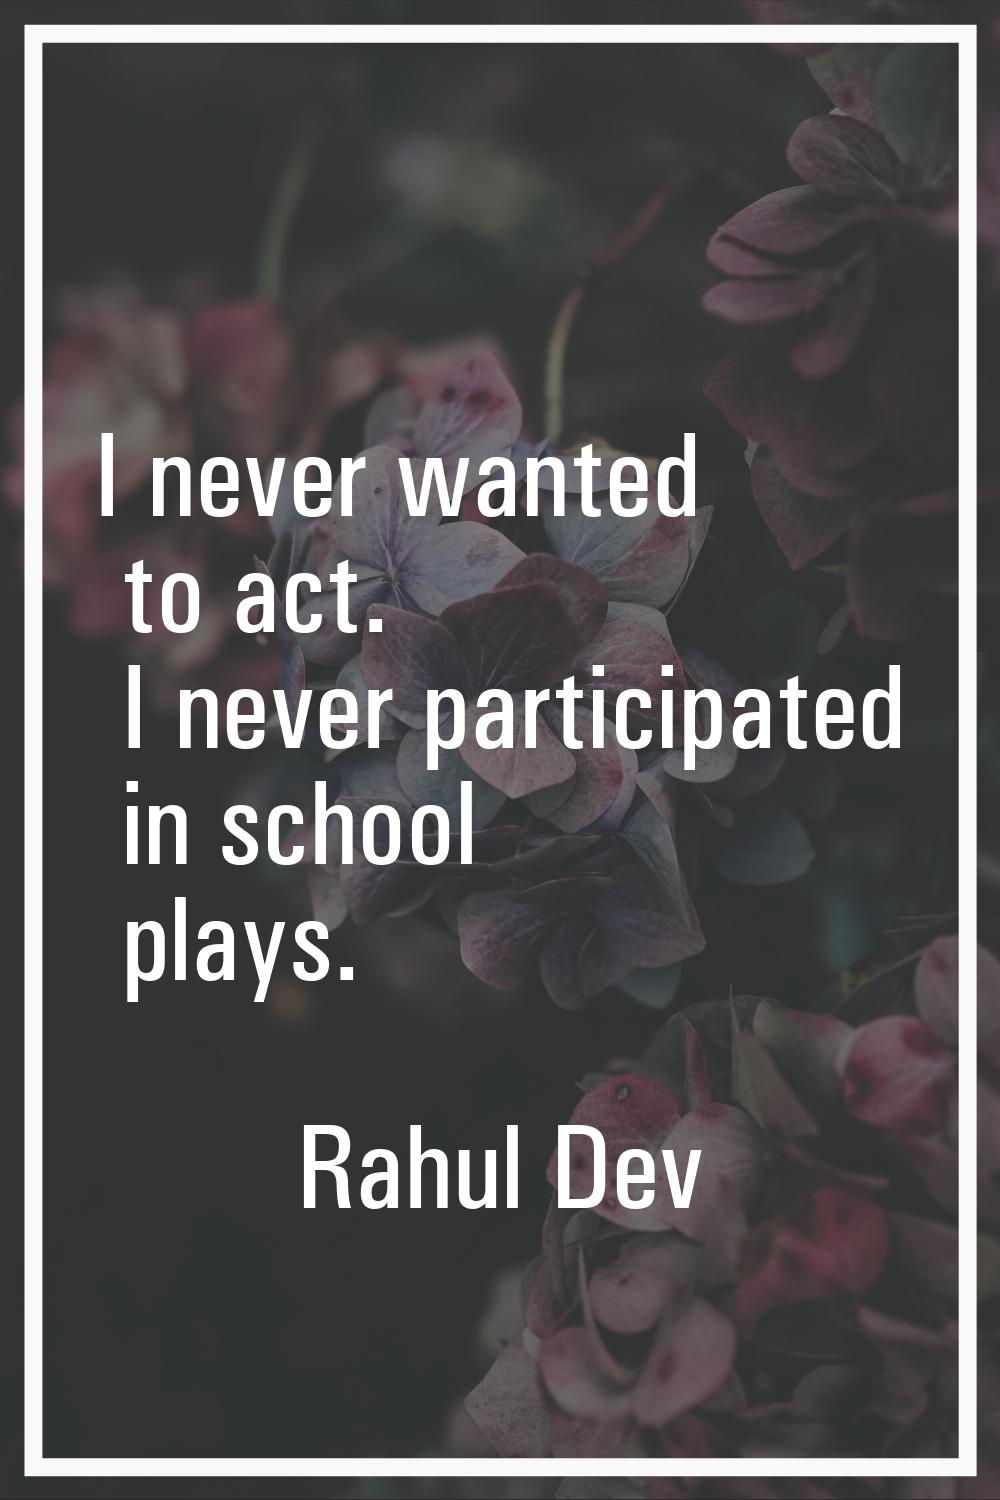 I never wanted to act. I never participated in school plays.